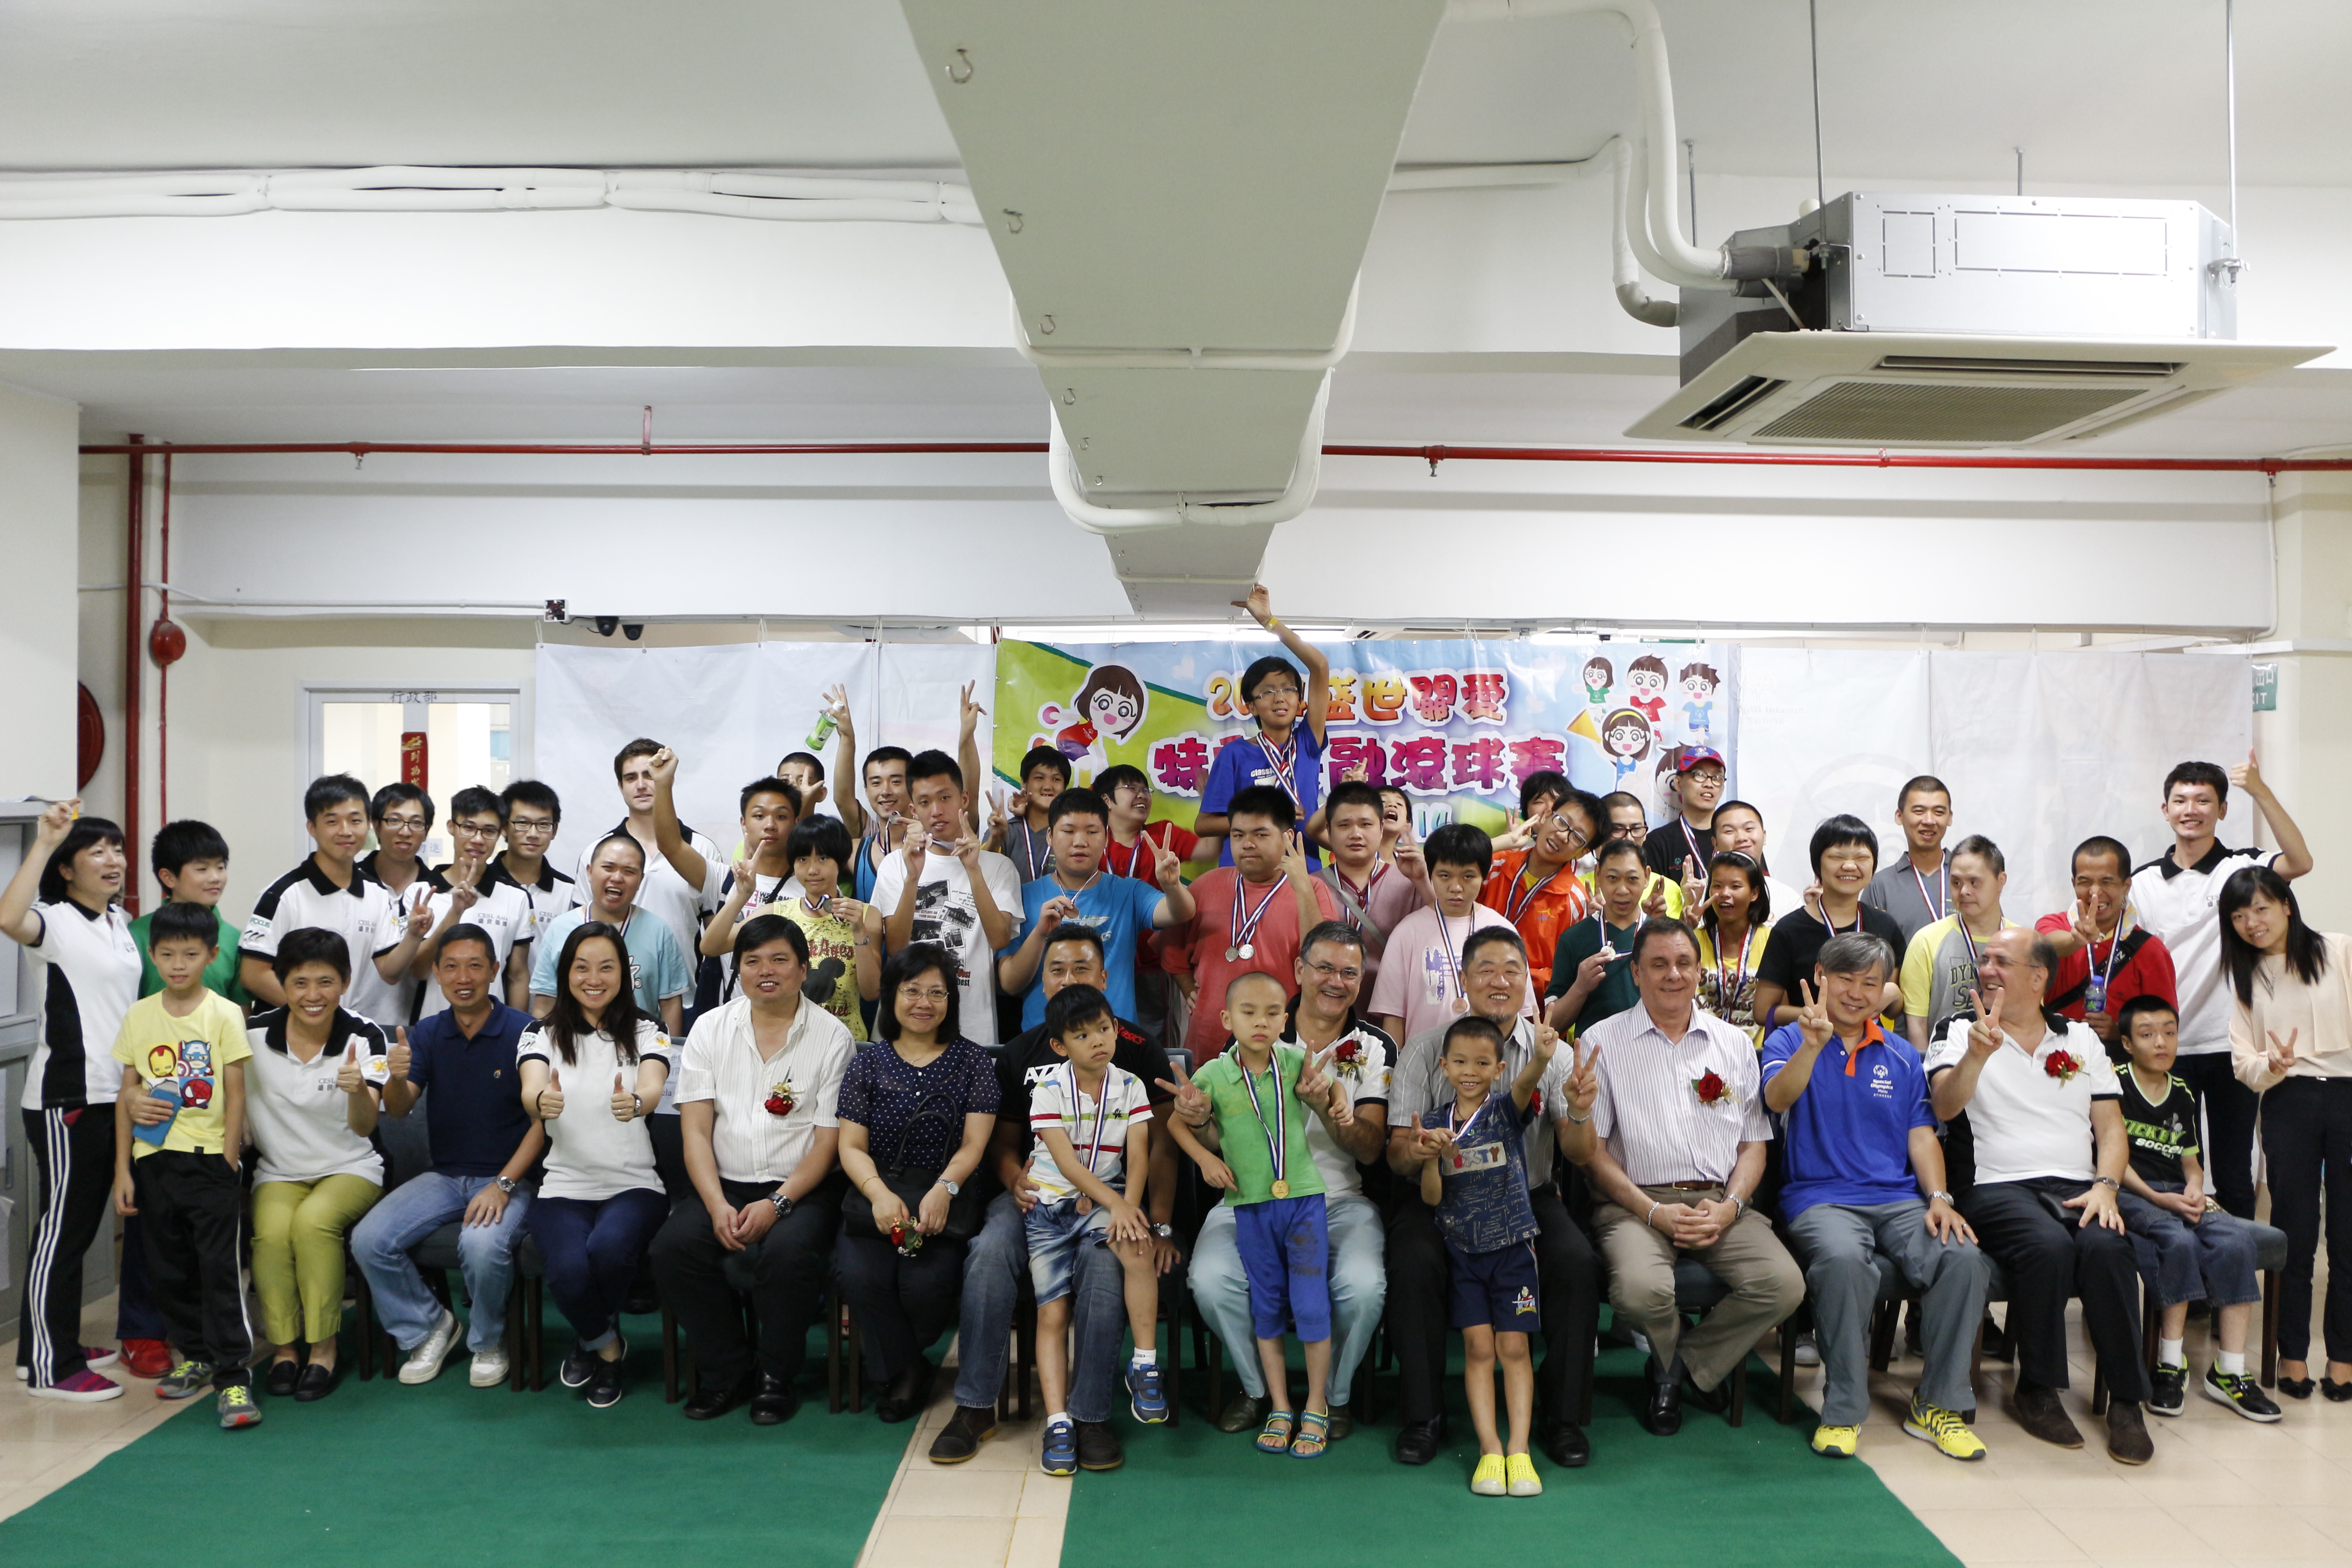 2014 CESL Asia & MSO Bocce Game Event (2014/07/20)